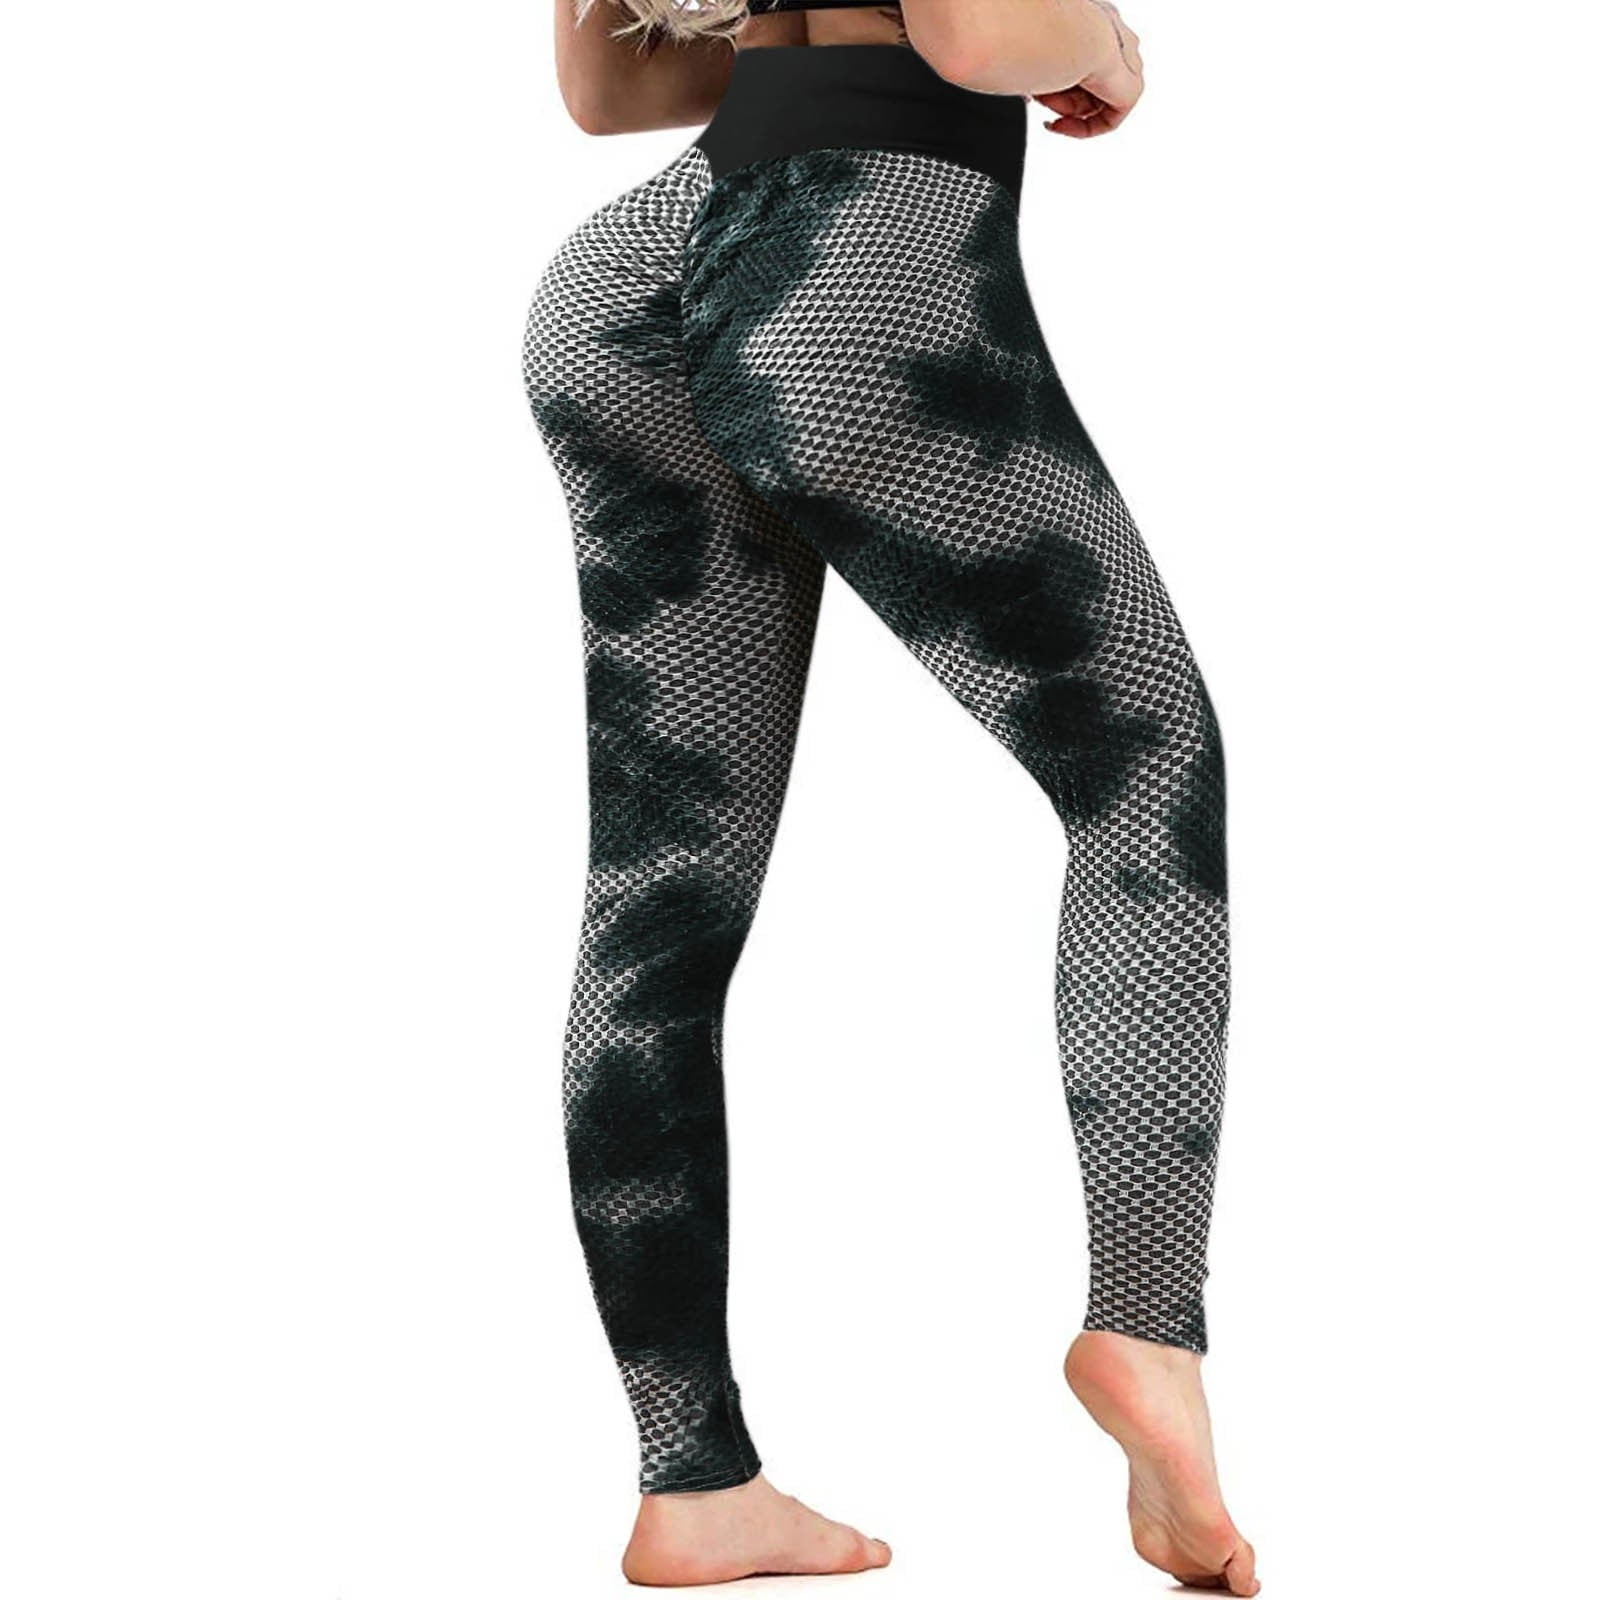 Locoowai 3 Pcs Workout Leggings for Women High Waist Seamless Scrunch Tights  Leggings Sport Active Yoga Pants for Gym Running (Small) at  Women's  Clothing store